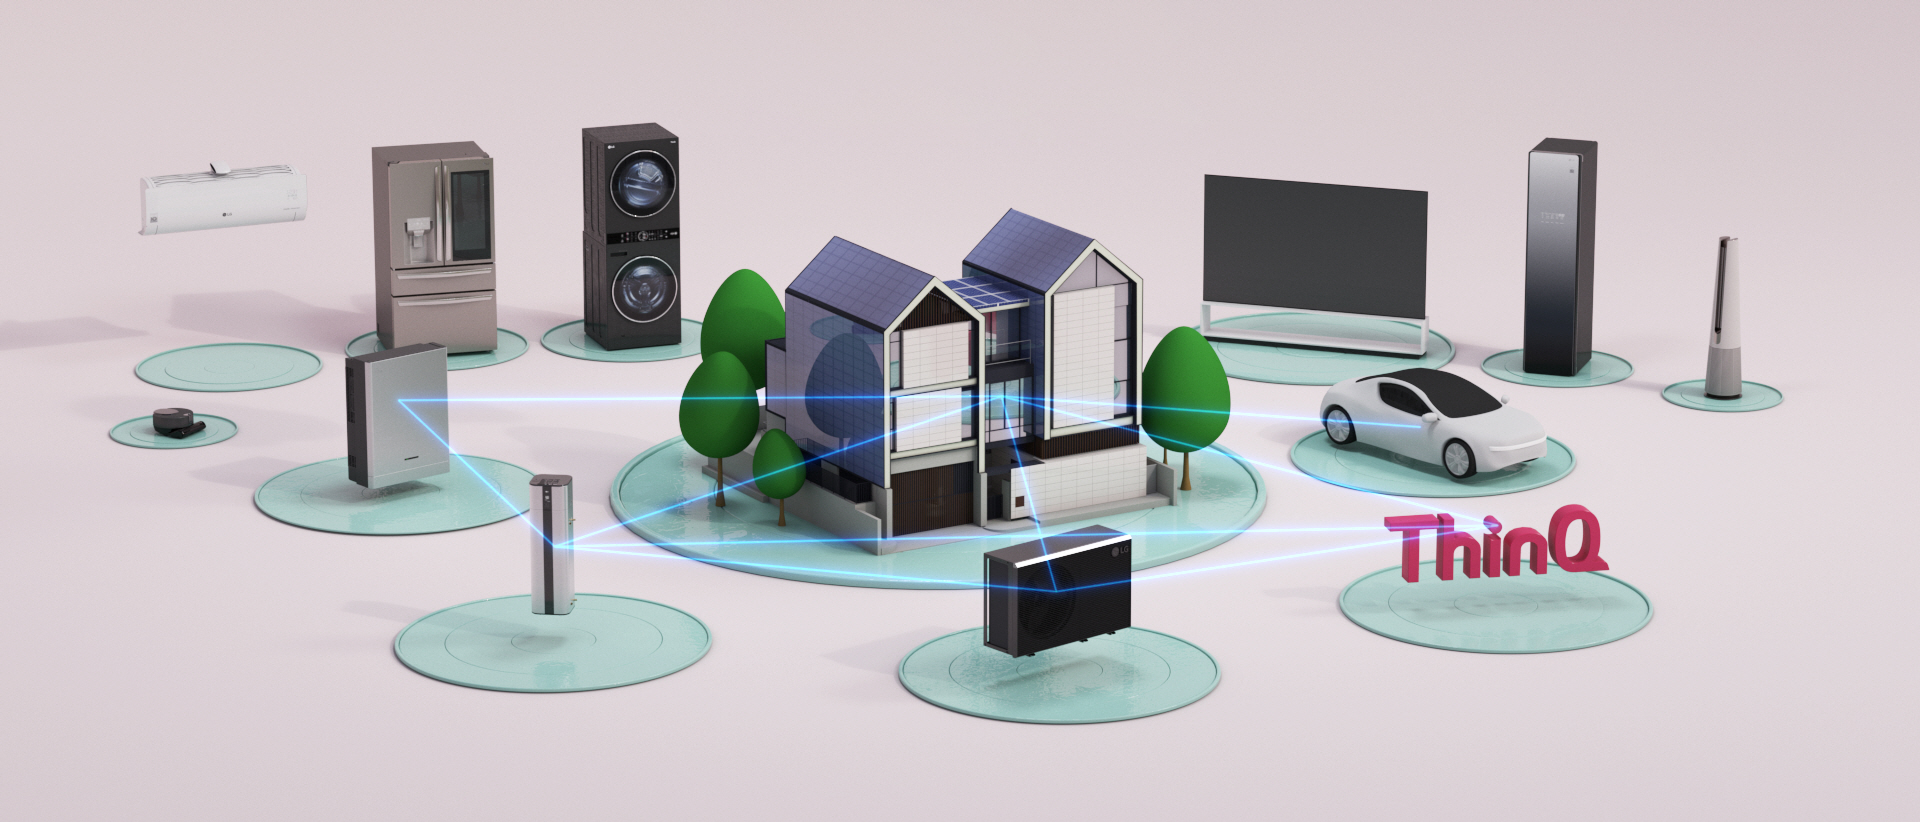 An image where various LG appliances are connected to a house with lines